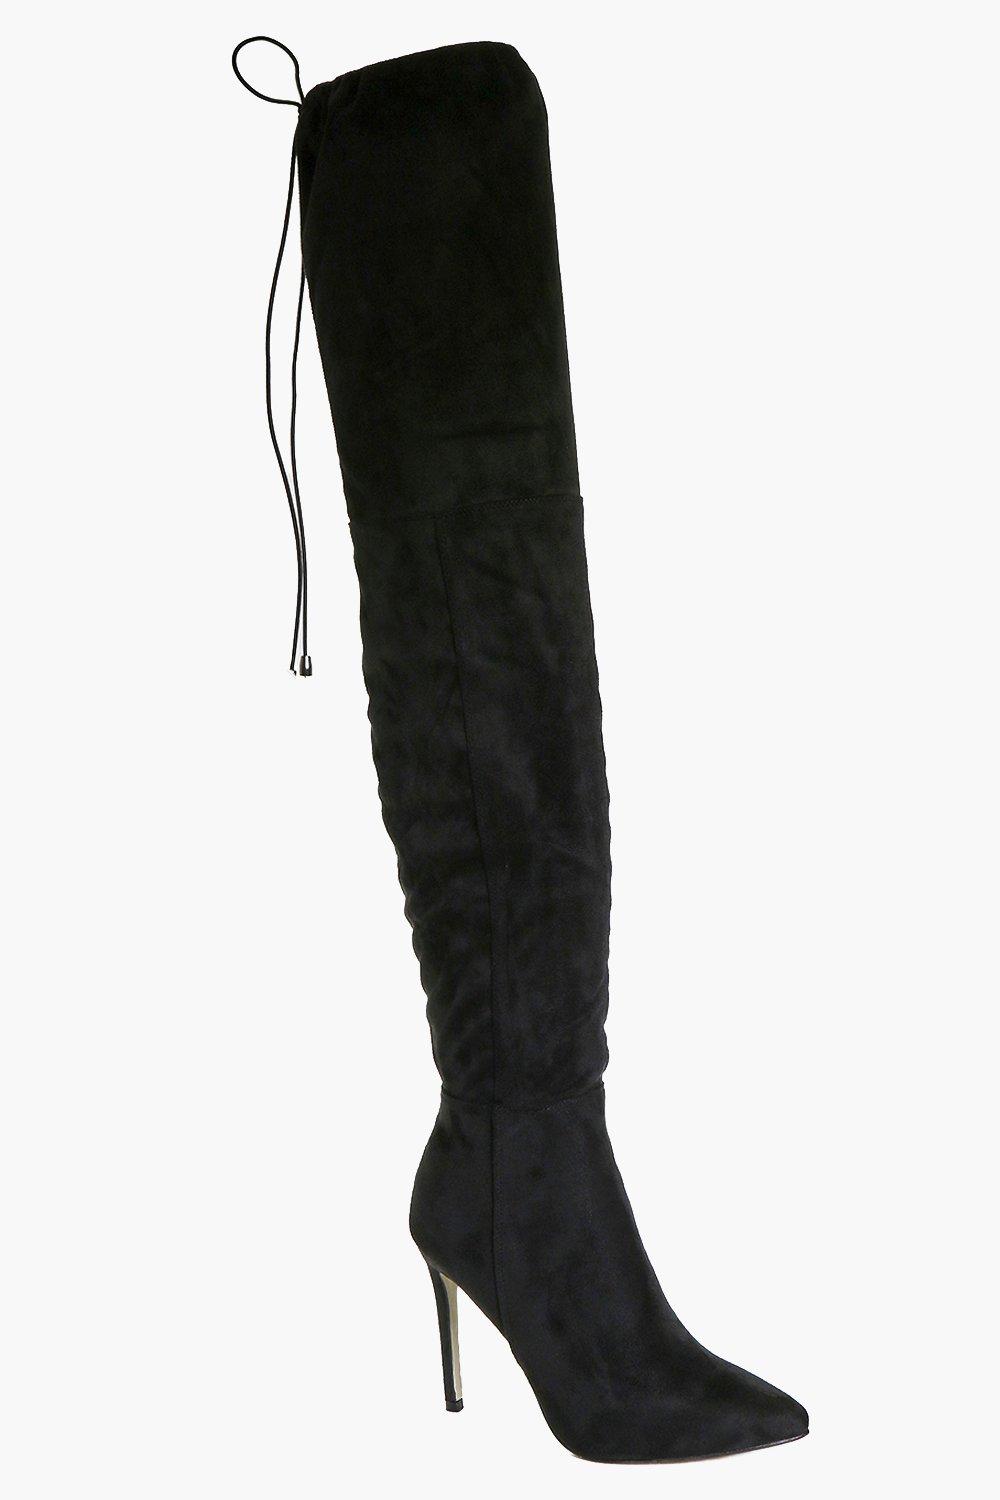 thigh high black pointed boots